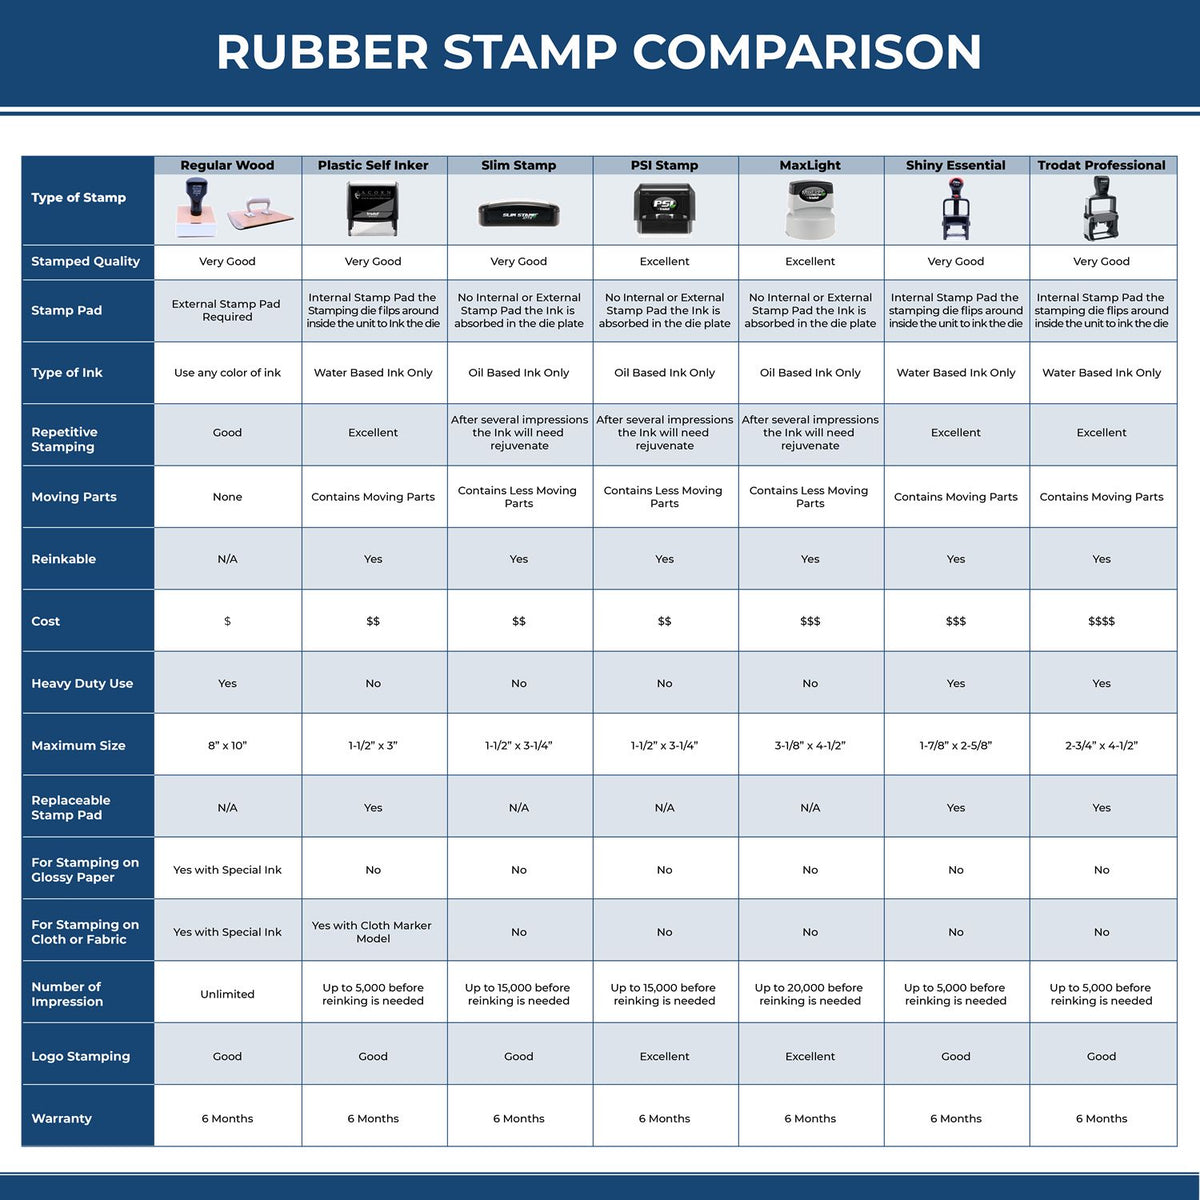 Large Self-Inking Confirmation of Phone Order Stamp 5642S Rubber Stamp Comparison